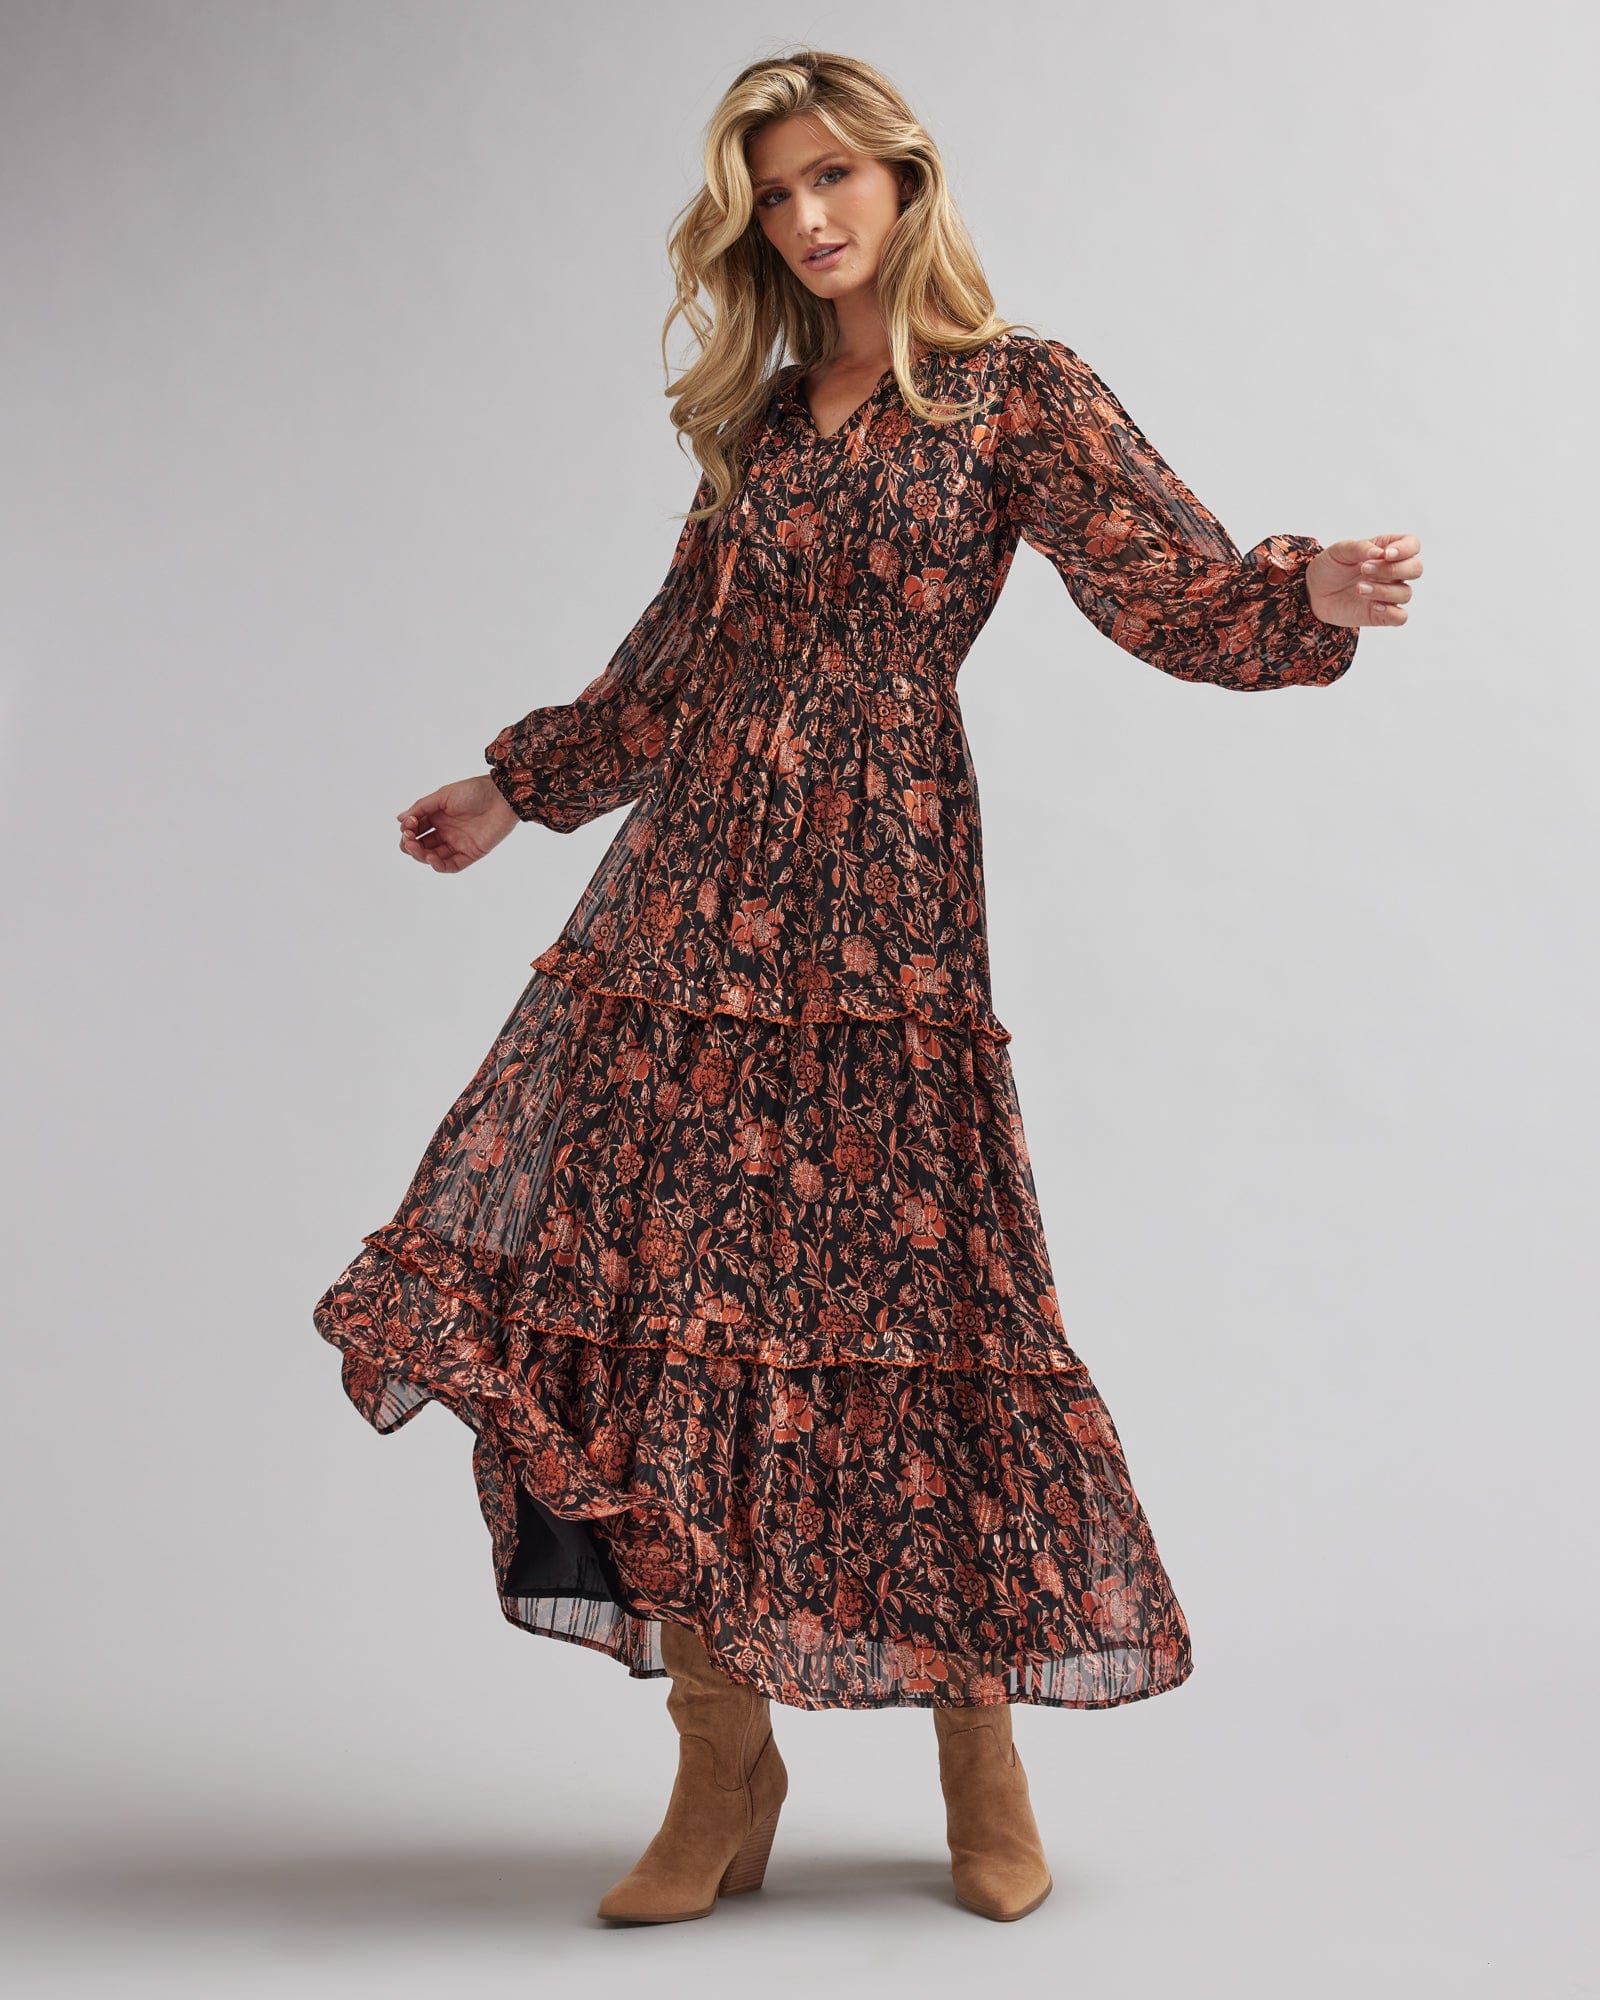 Woman in a long sleeve, maxi length, black and orange floral print dress